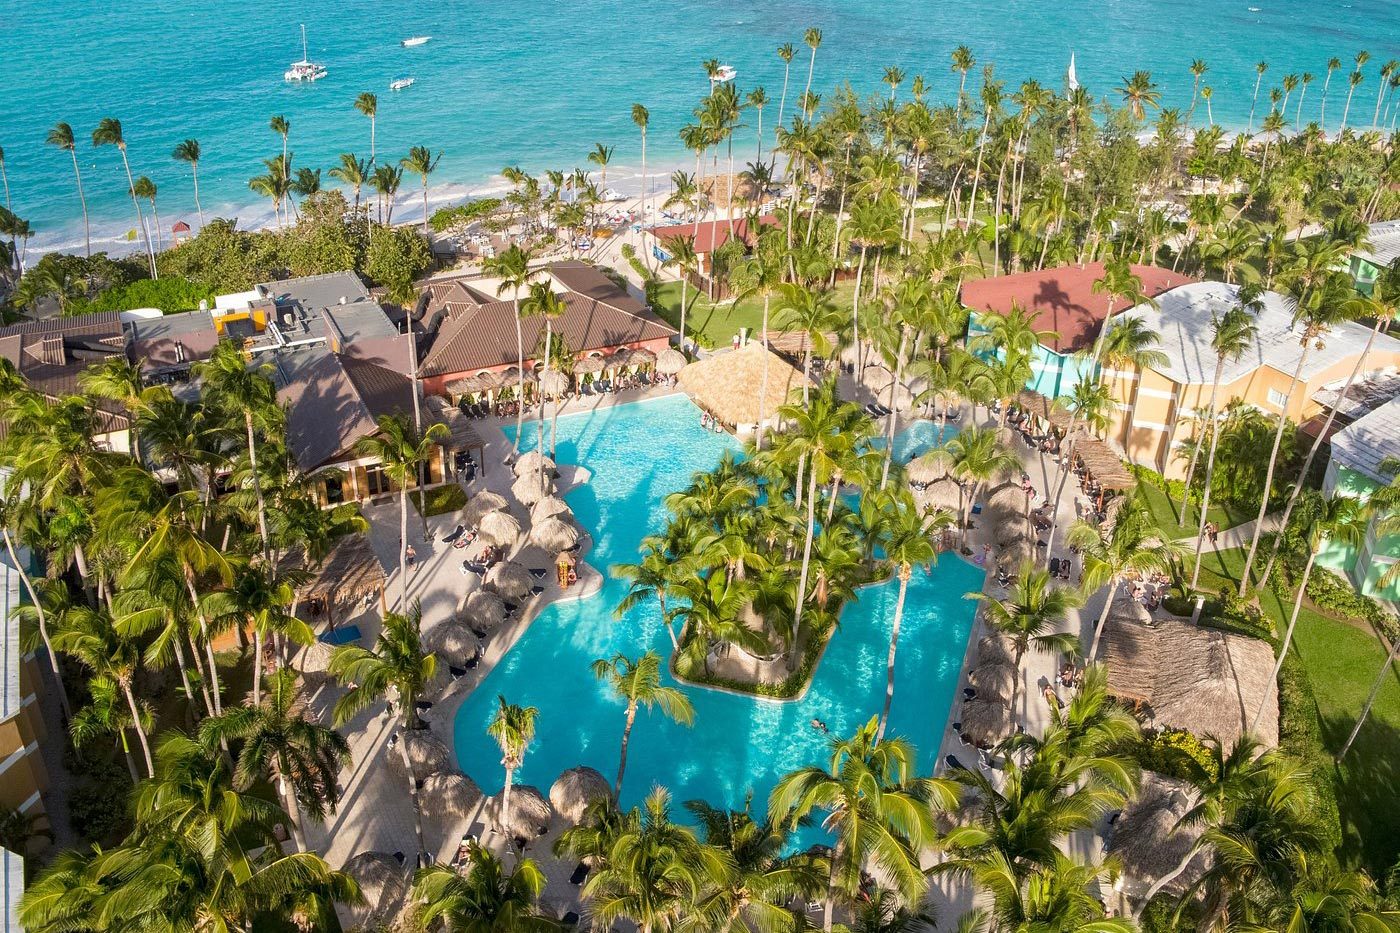 <h3>Grand Palladium Punta Cana Resort & Spa, Dominican Republic</h3> <p>Rather than a place for all you can eat, <a href="https://www.tripadvisor.com/Hotel_Review-g3176298-d292158-Reviews-Grand_Palladium_Punta_Cana_Resort_Spa-Bavaro_Punta_Cana_La_Altagracia_Province_Dominic.html" rel="noopener noreferrer">this resort</a> is where <em>anyone</em> can eat. That's thanks to an allergy-conscious program created with dietitians and strictly enforced by chefs and food-prep staff. Guests are asked to identify their food allergies at check-in and are issued a color-coded bilingual card that also gives them a cheat sheet for buffet selections and menu items at any a la carte restaurant.</p> <p>Lovers of <a href="https://www.rd.com/list/warm-water-beaches/" rel="noopener noreferrer">warm-water beaches</a> will also enjoy access to the neighboring Grand Palladium Bavaro Resort & Spa and Grand Palladium Palace Resort & Spa, which means access to 13 bars and six beach bars throughout the complex. The resort also offers a sports center—or you can reserve one of four badminton, six hard-floor tennis, four paddleball or six pétanque courts. You can relax in the spacious, contemporary rooms, whose dimensions start at 376 square feet, or settle into your own personal hydro-massage bath.</p> <p><strong>Pros:</strong></p> <ul> <li>Allergy-friendly dining</li> <li>Global a la carte restaurant themes go beyond the expected</li> <li>Kids will love the pool with a pirate ship</li> </ul> <p><strong>Cons:</strong></p> <ul> <li>Additional charge for room service</li> <li>Reservations are required for dining</li> </ul> <p class="listicle-page__cta-button-shop"><a class="shop-btn" href="https://www.tripadvisor.com/Hotel_Review-g3176298-d292158-Reviews-Grand_Palladium_Punta_Cana_Resort_Spa-Bavaro_Punta_Cana_La_Altagracia_Province_Dominic.html">Book Now</a></p>